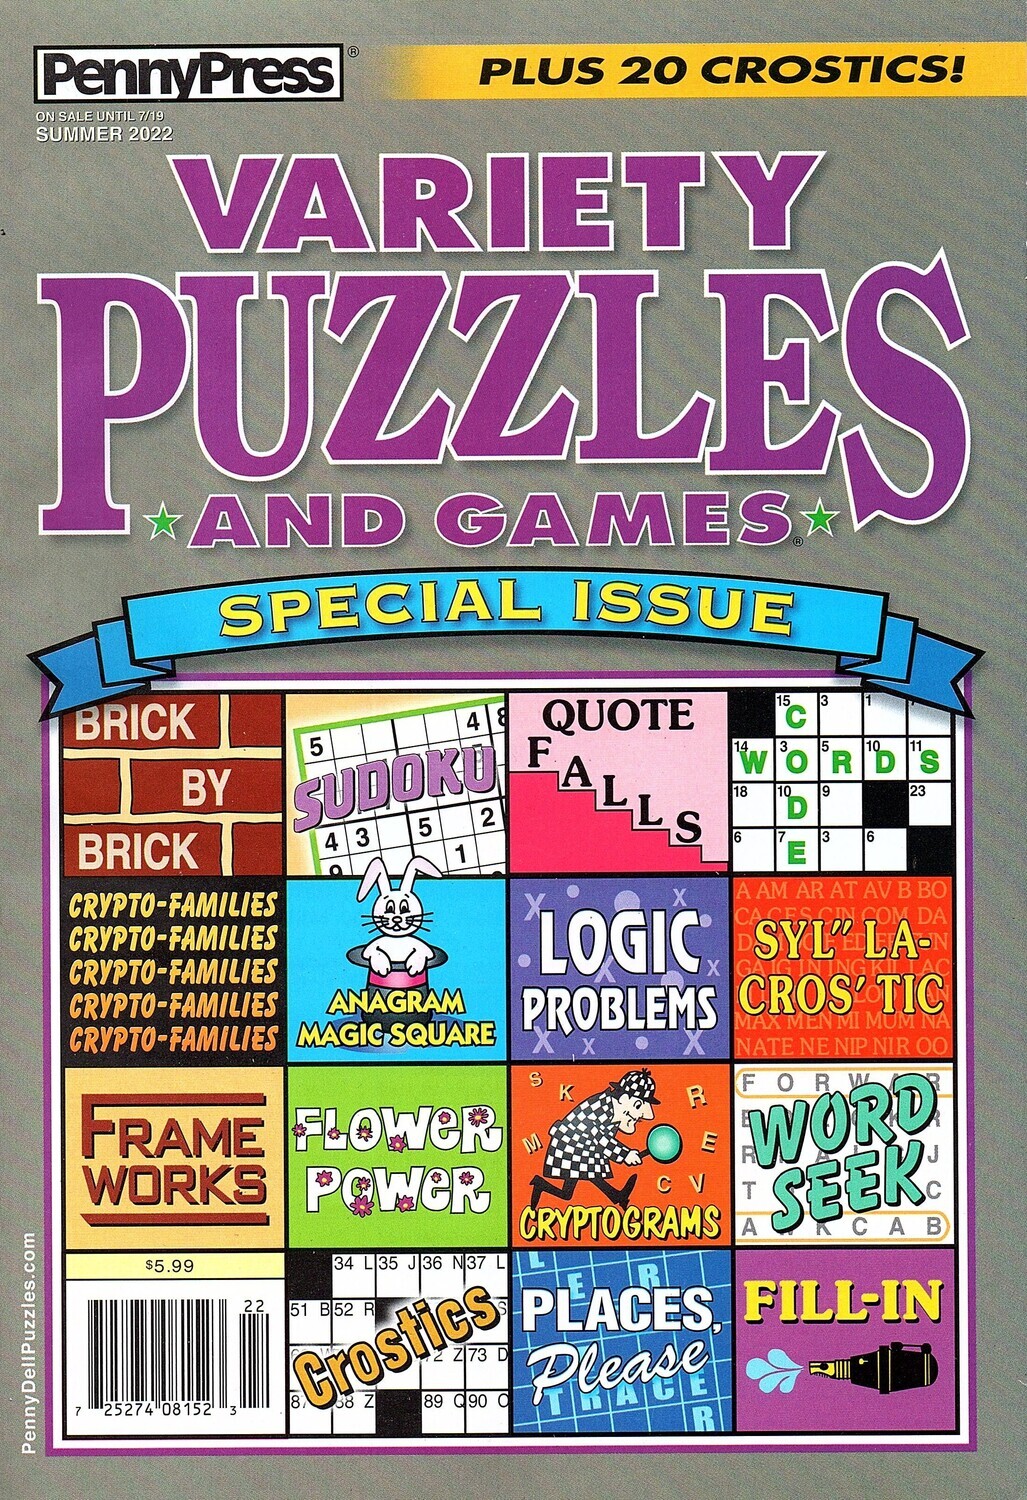 Variety Puzzles and Games Special Issue Summer 2022